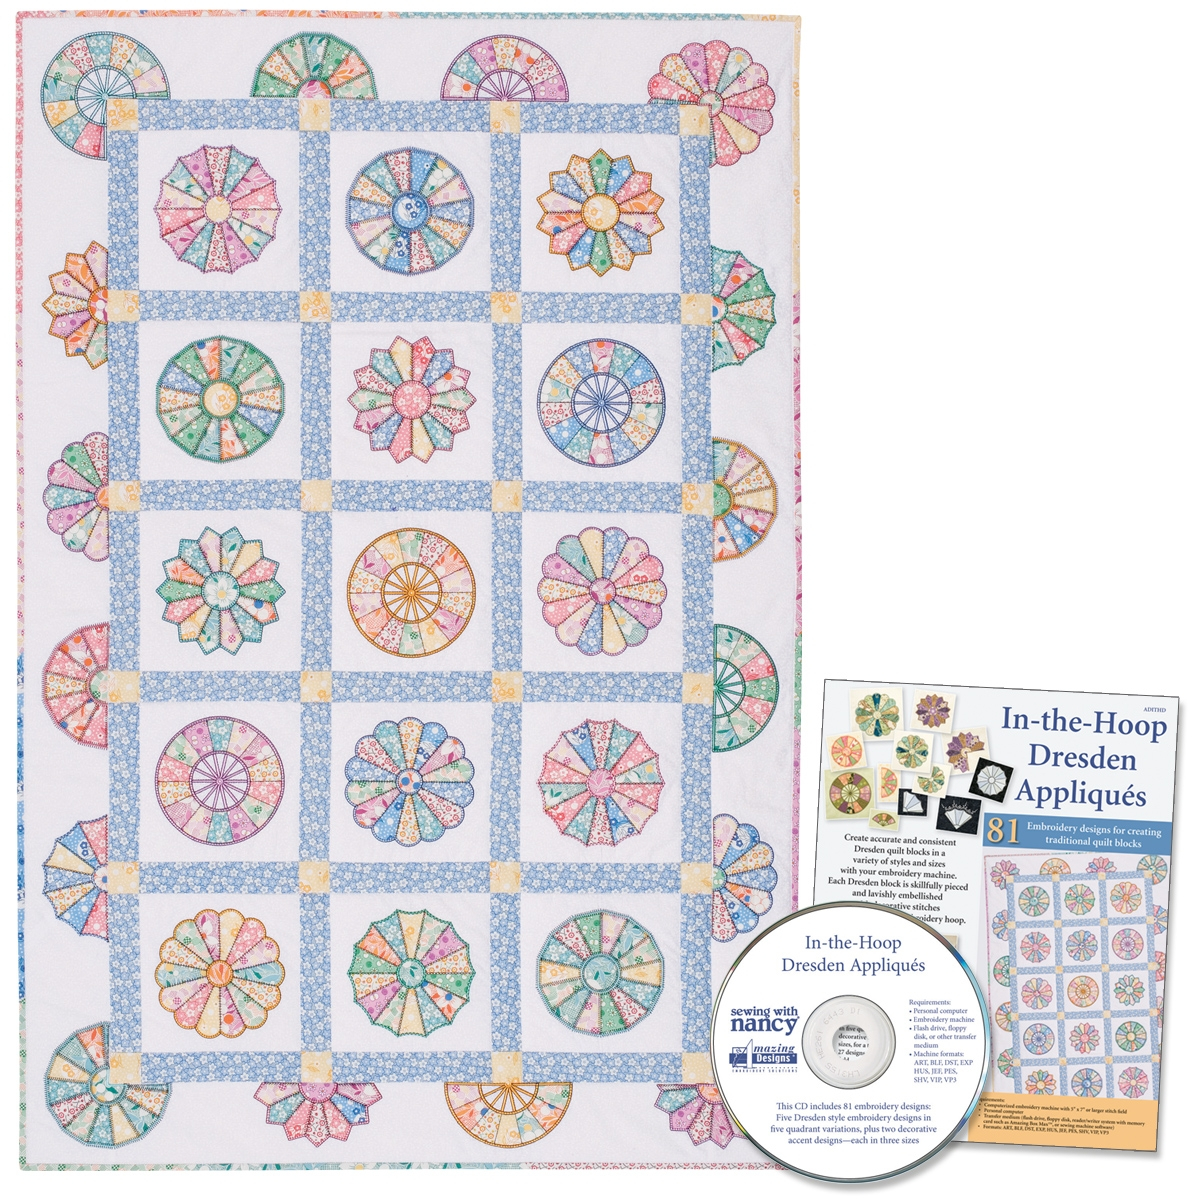 Sewing Machine Embroidery Patterns In The Hoop Dresden Appliques Embroidery Designs